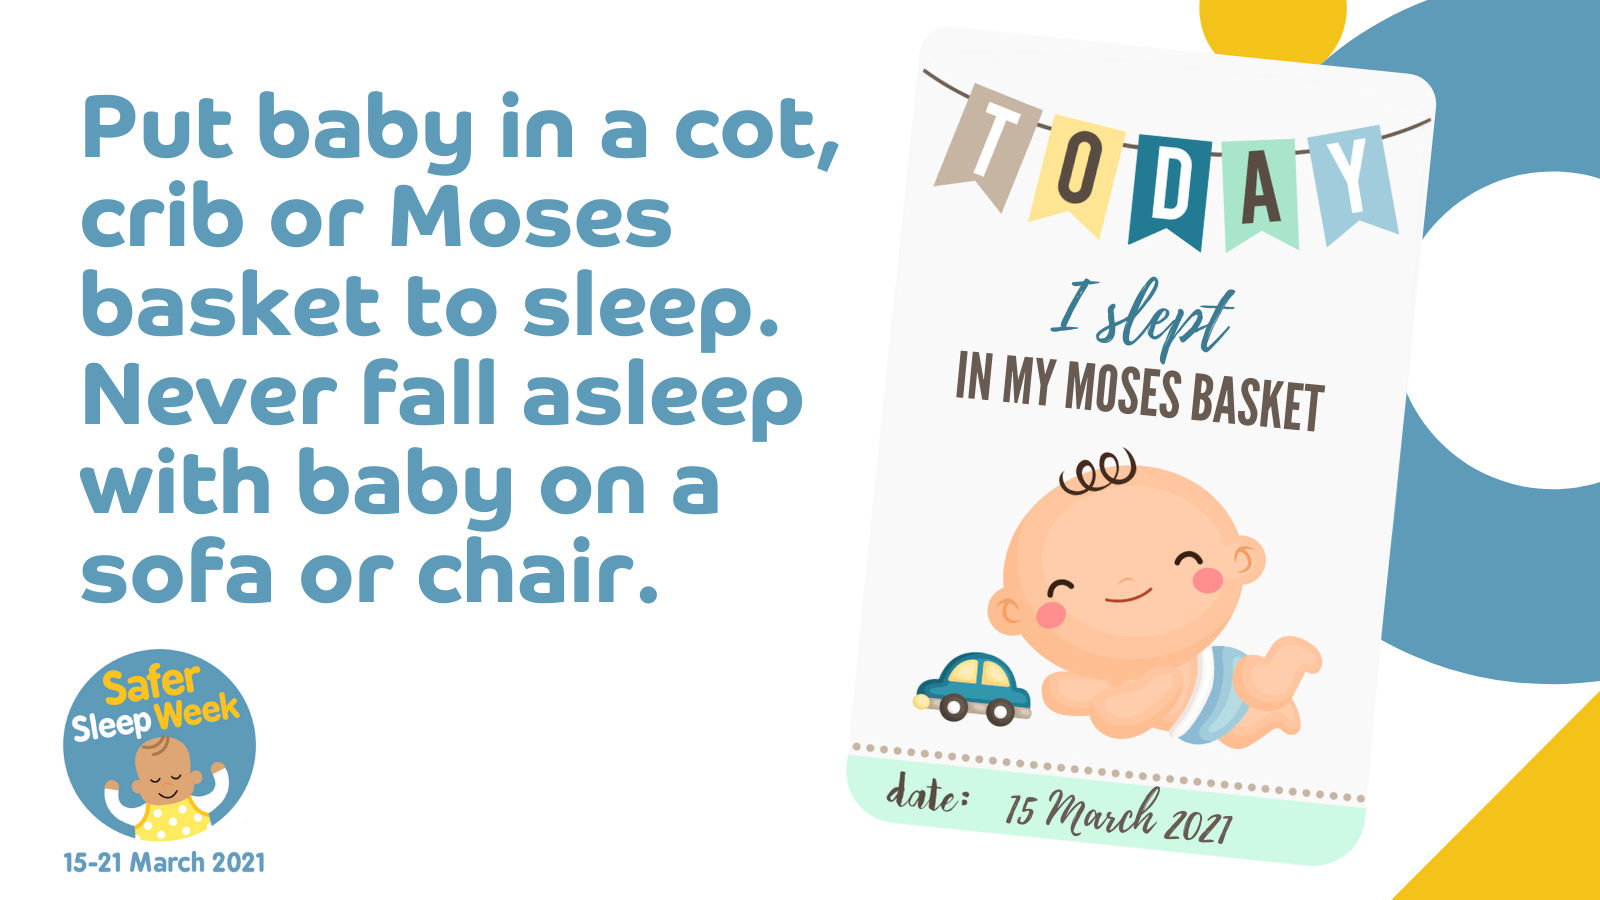 Card saying 'Today I slept in my Moses basket' with cartoon image of a baby playing with a toy car. Captioned: 'Put baby in a cot, crib or Moses basket to sleep.  Never fall asleep with a baby on a sofa or chair'